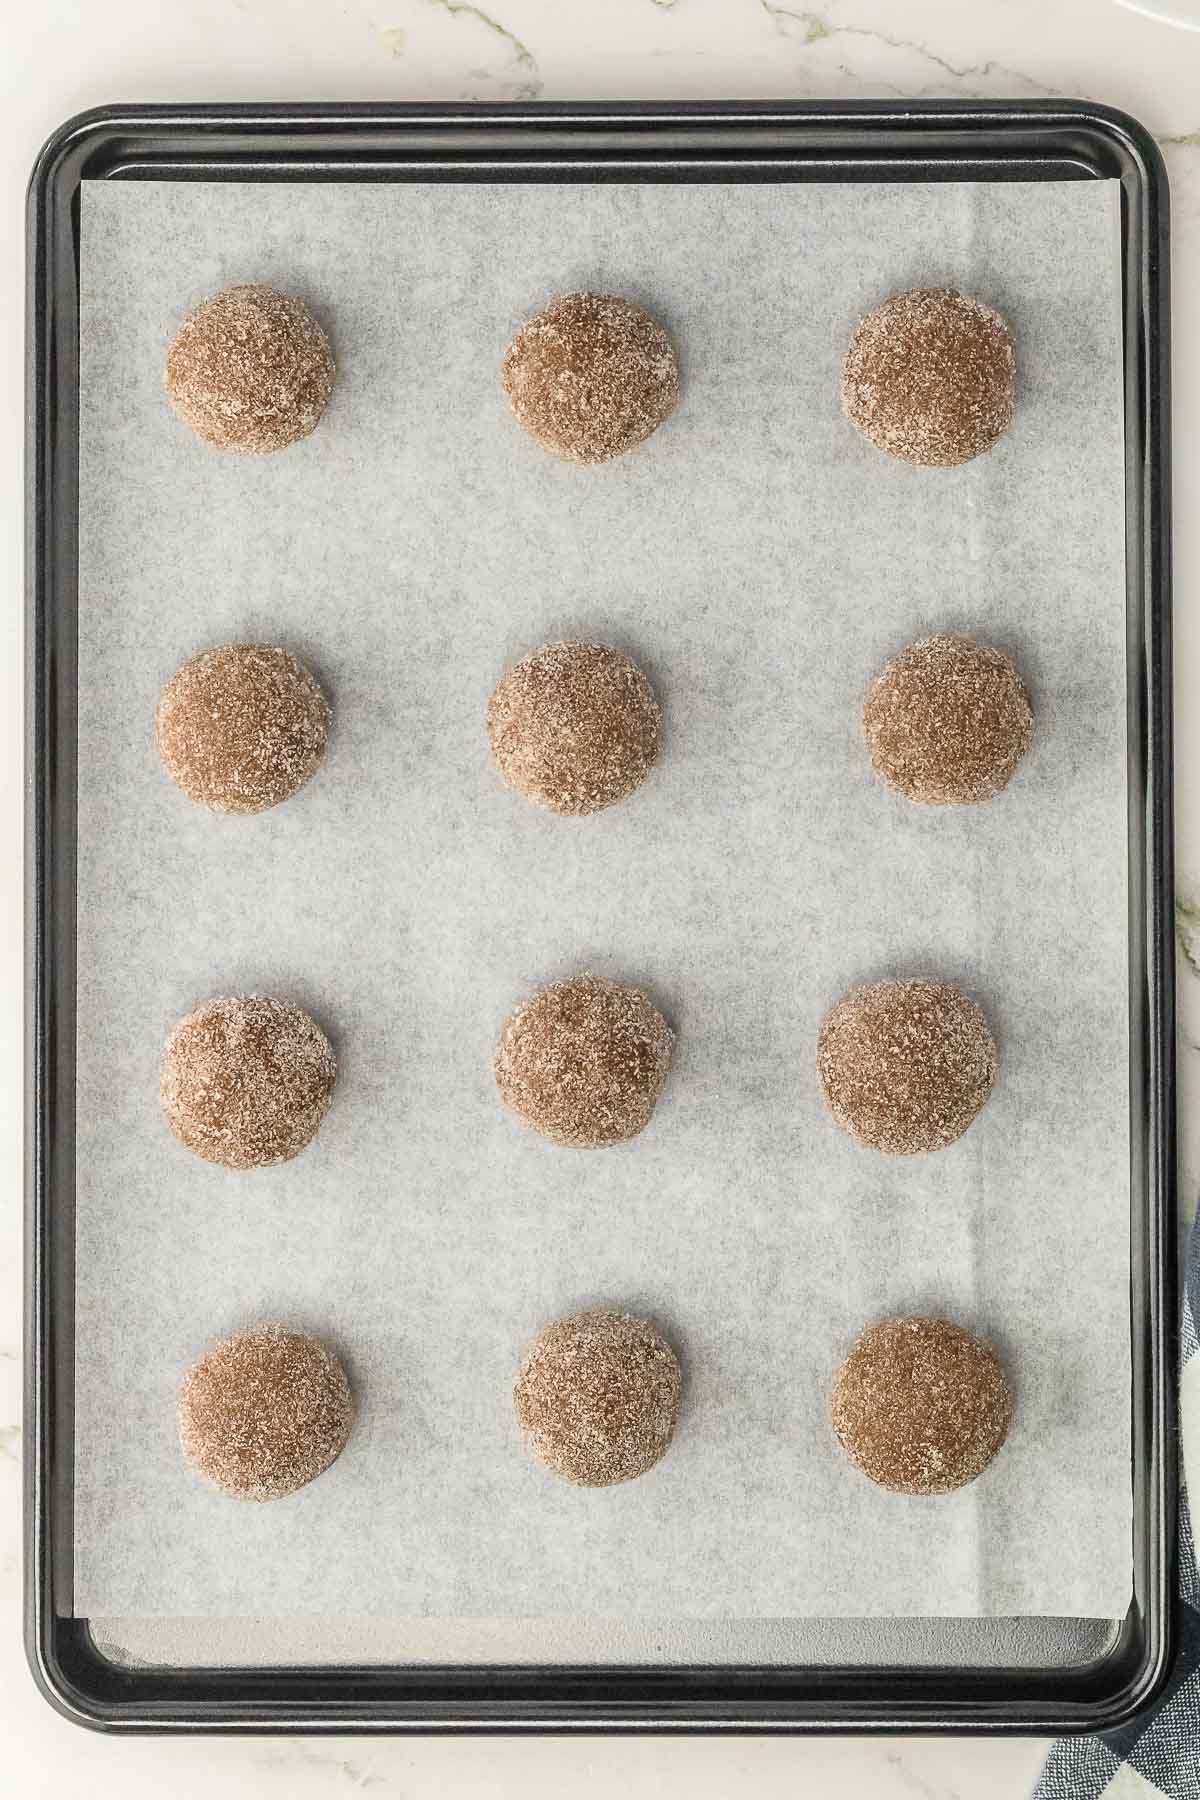 A baking sheet filled with dough balls covered in cinnamon sugar.